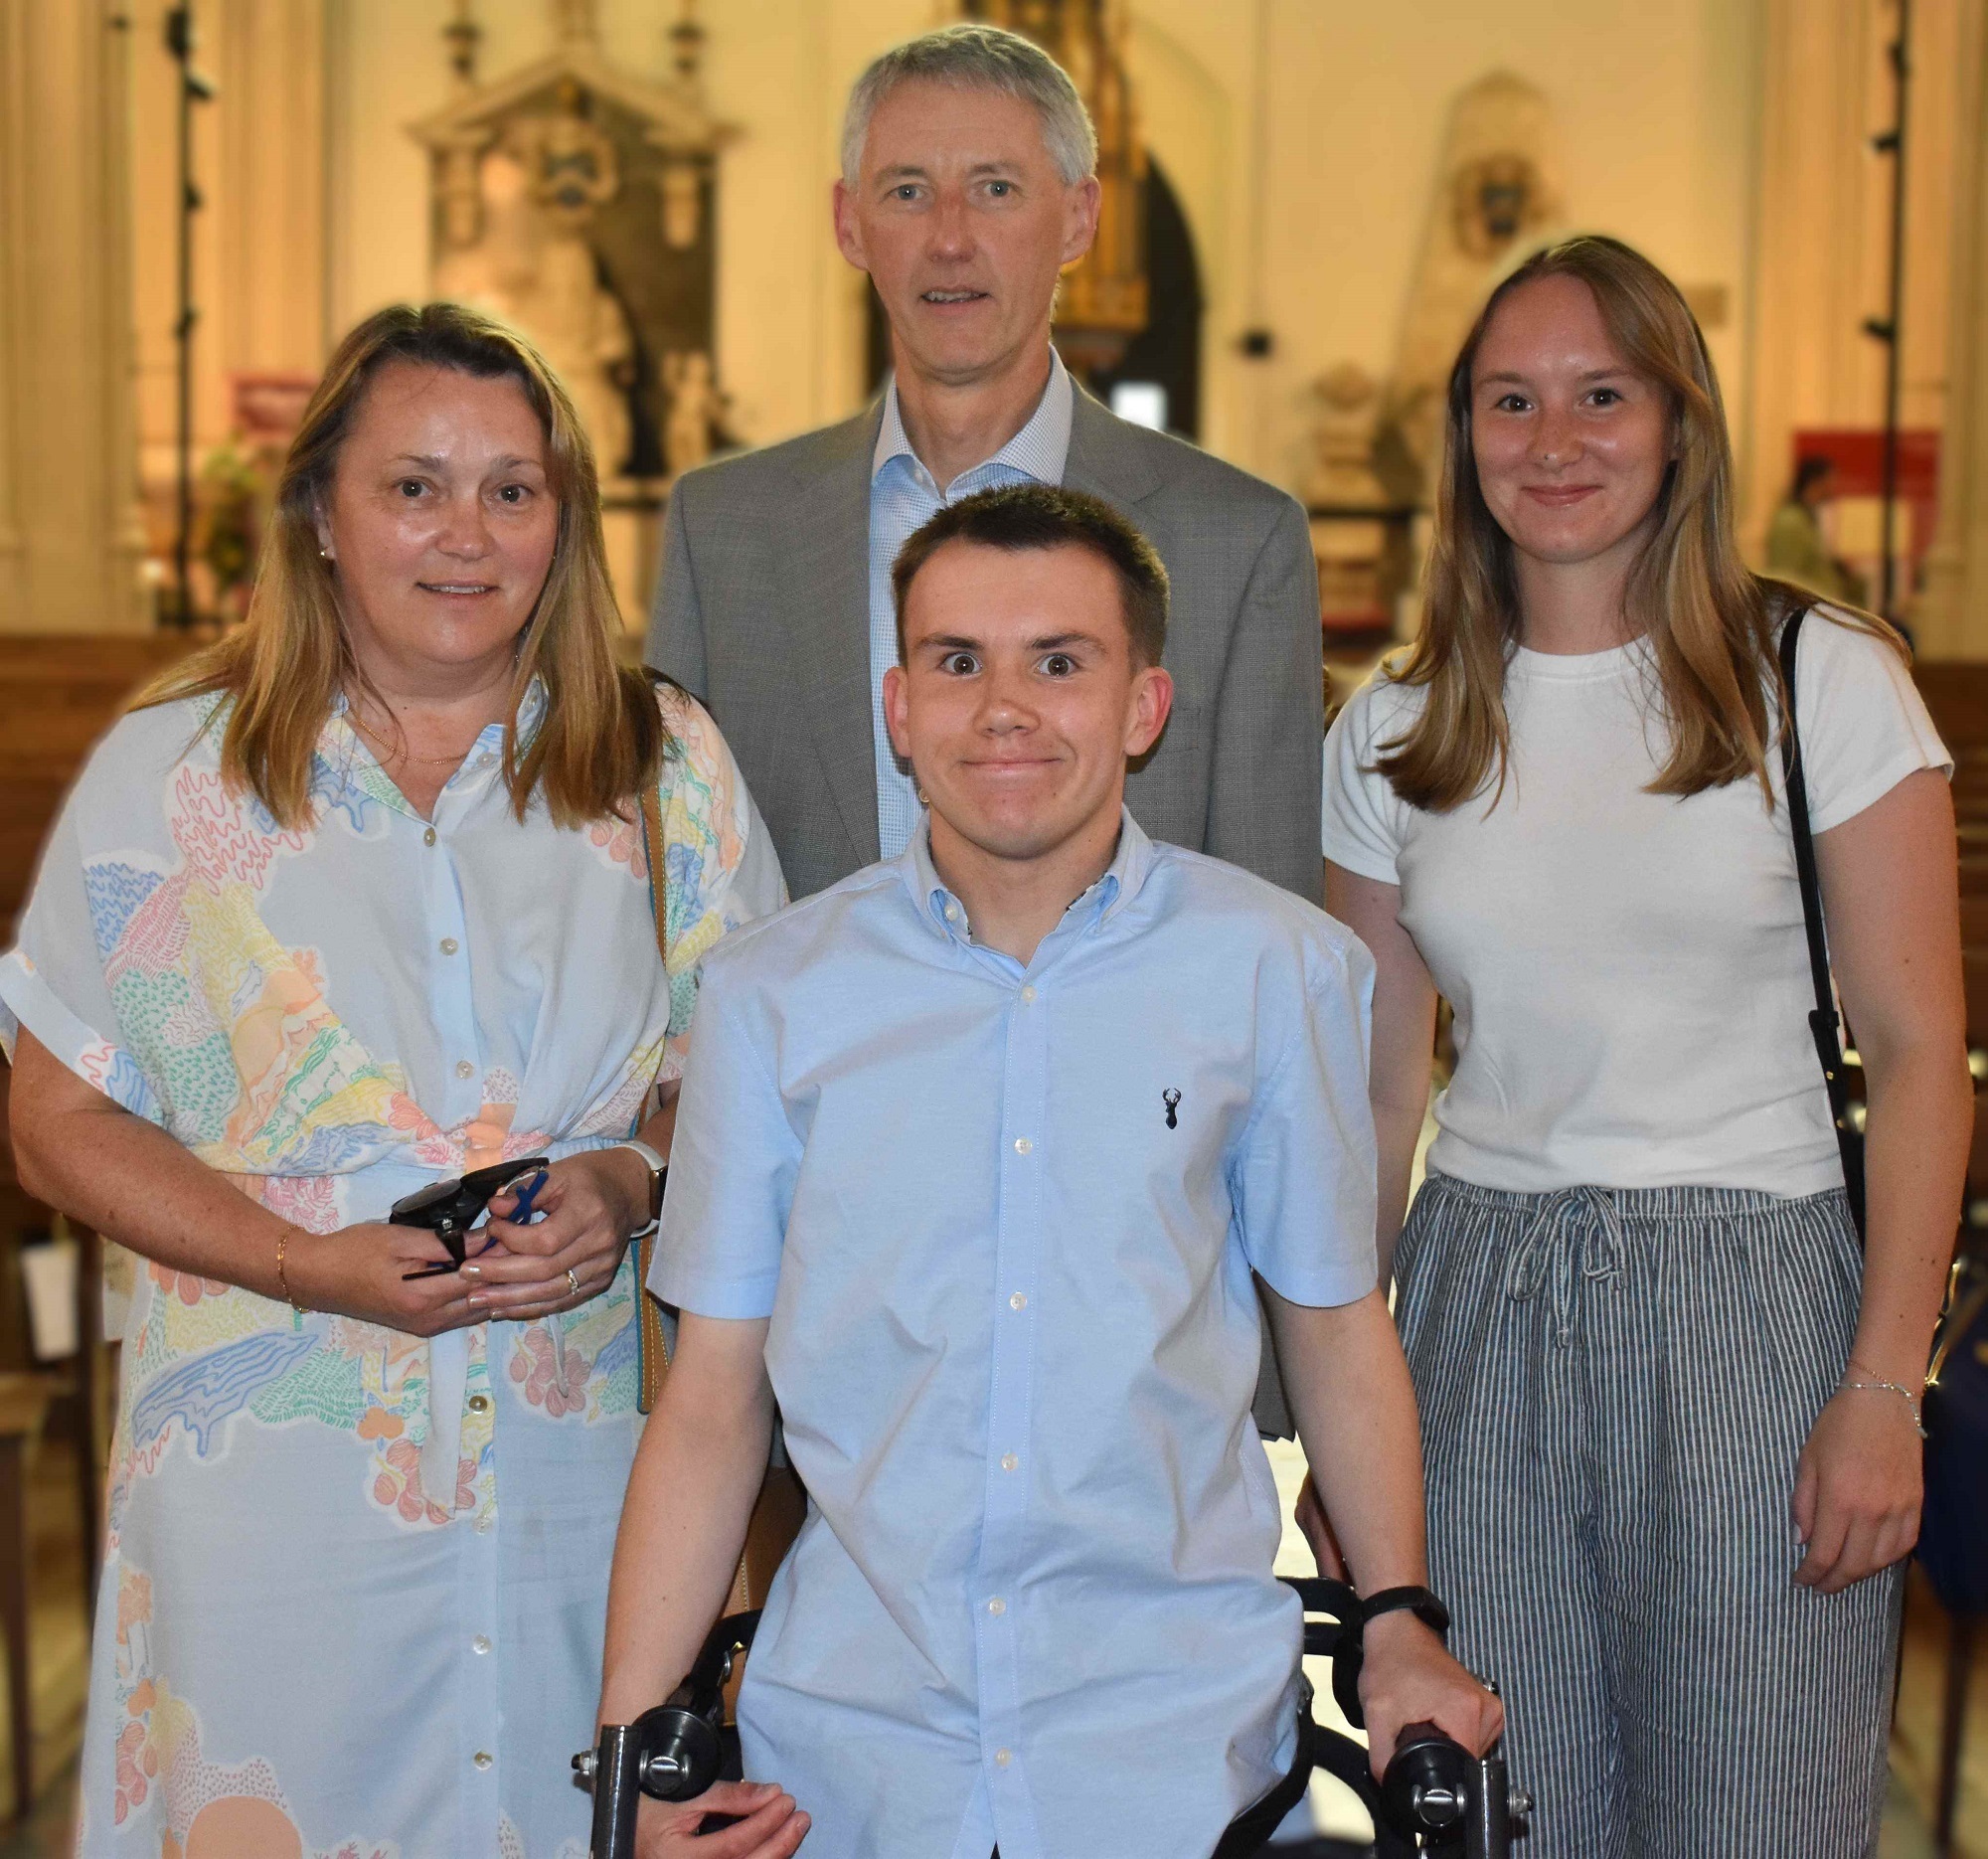 1Hamish Crawford from One Sixth Form College who showed remarkable growth and unwavering determination to win a charachter strength award   here he is pictured with his family   the Crawford's